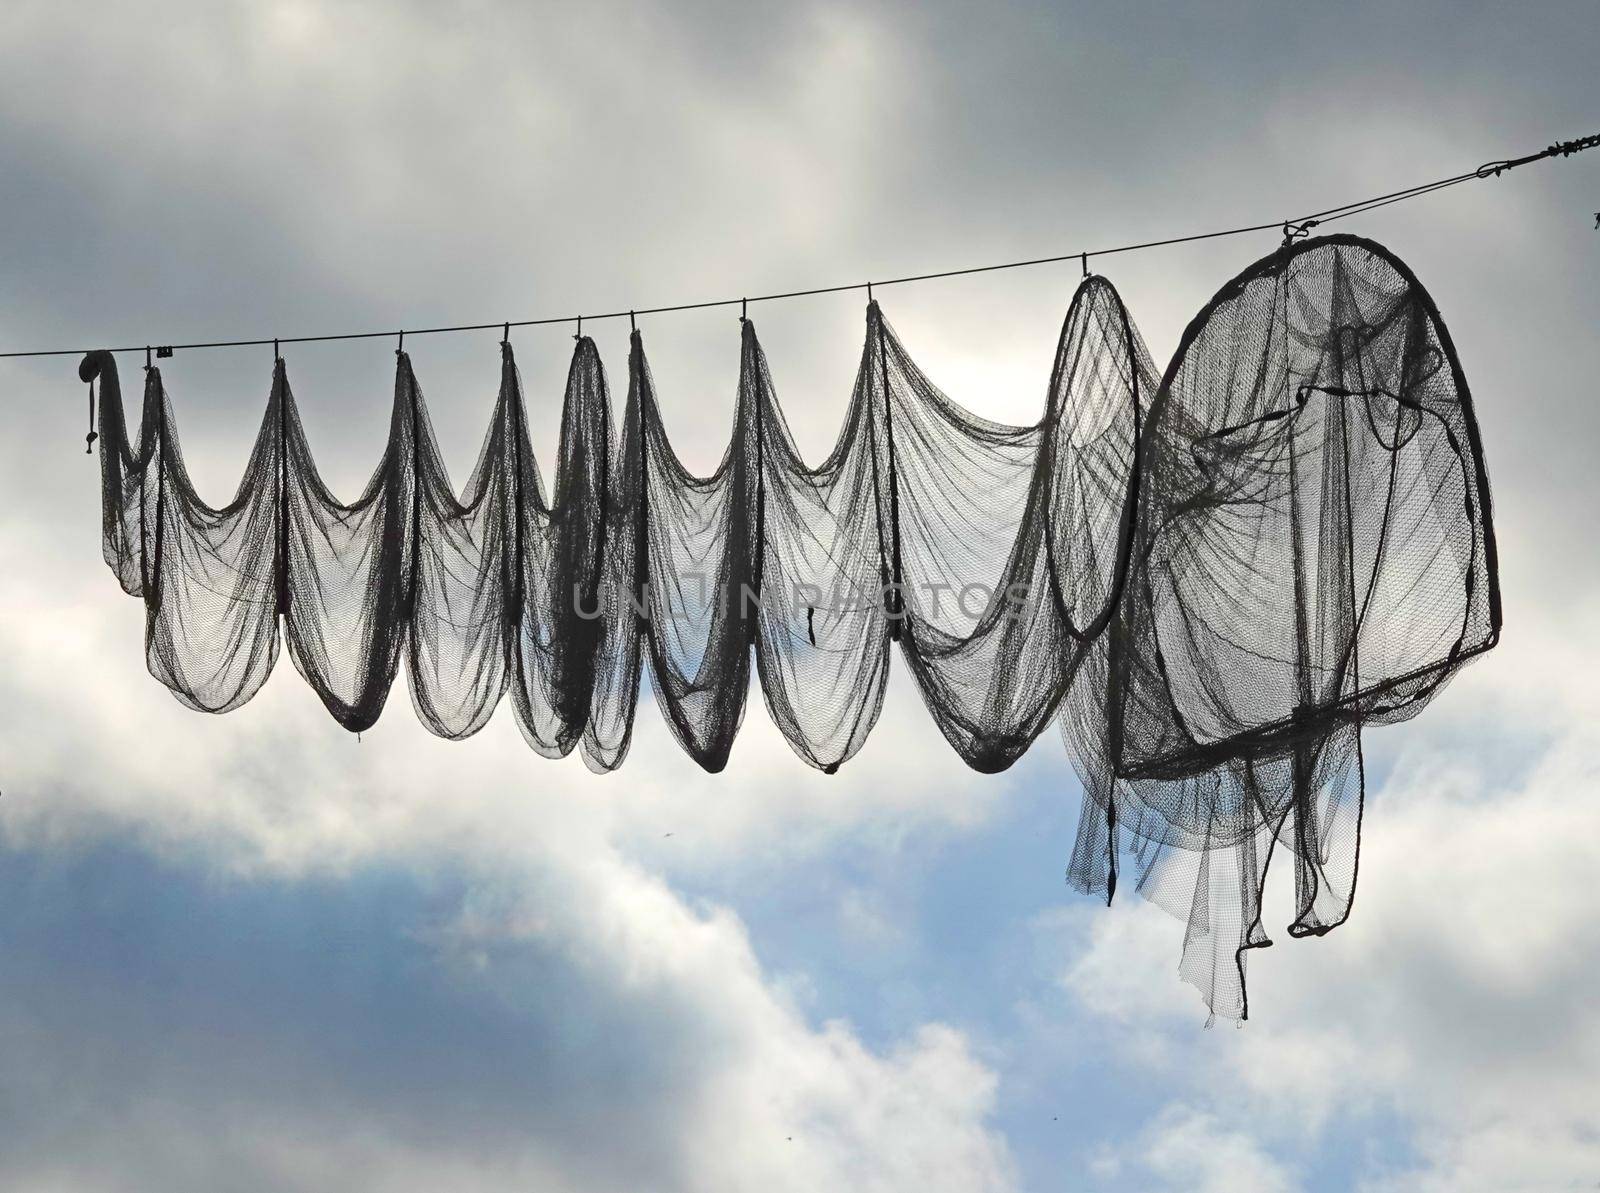 A fishing net  (hoop net or fyke) hanging on a cable. These nets are used in Elburg, the Netherlands, to beautify the main street